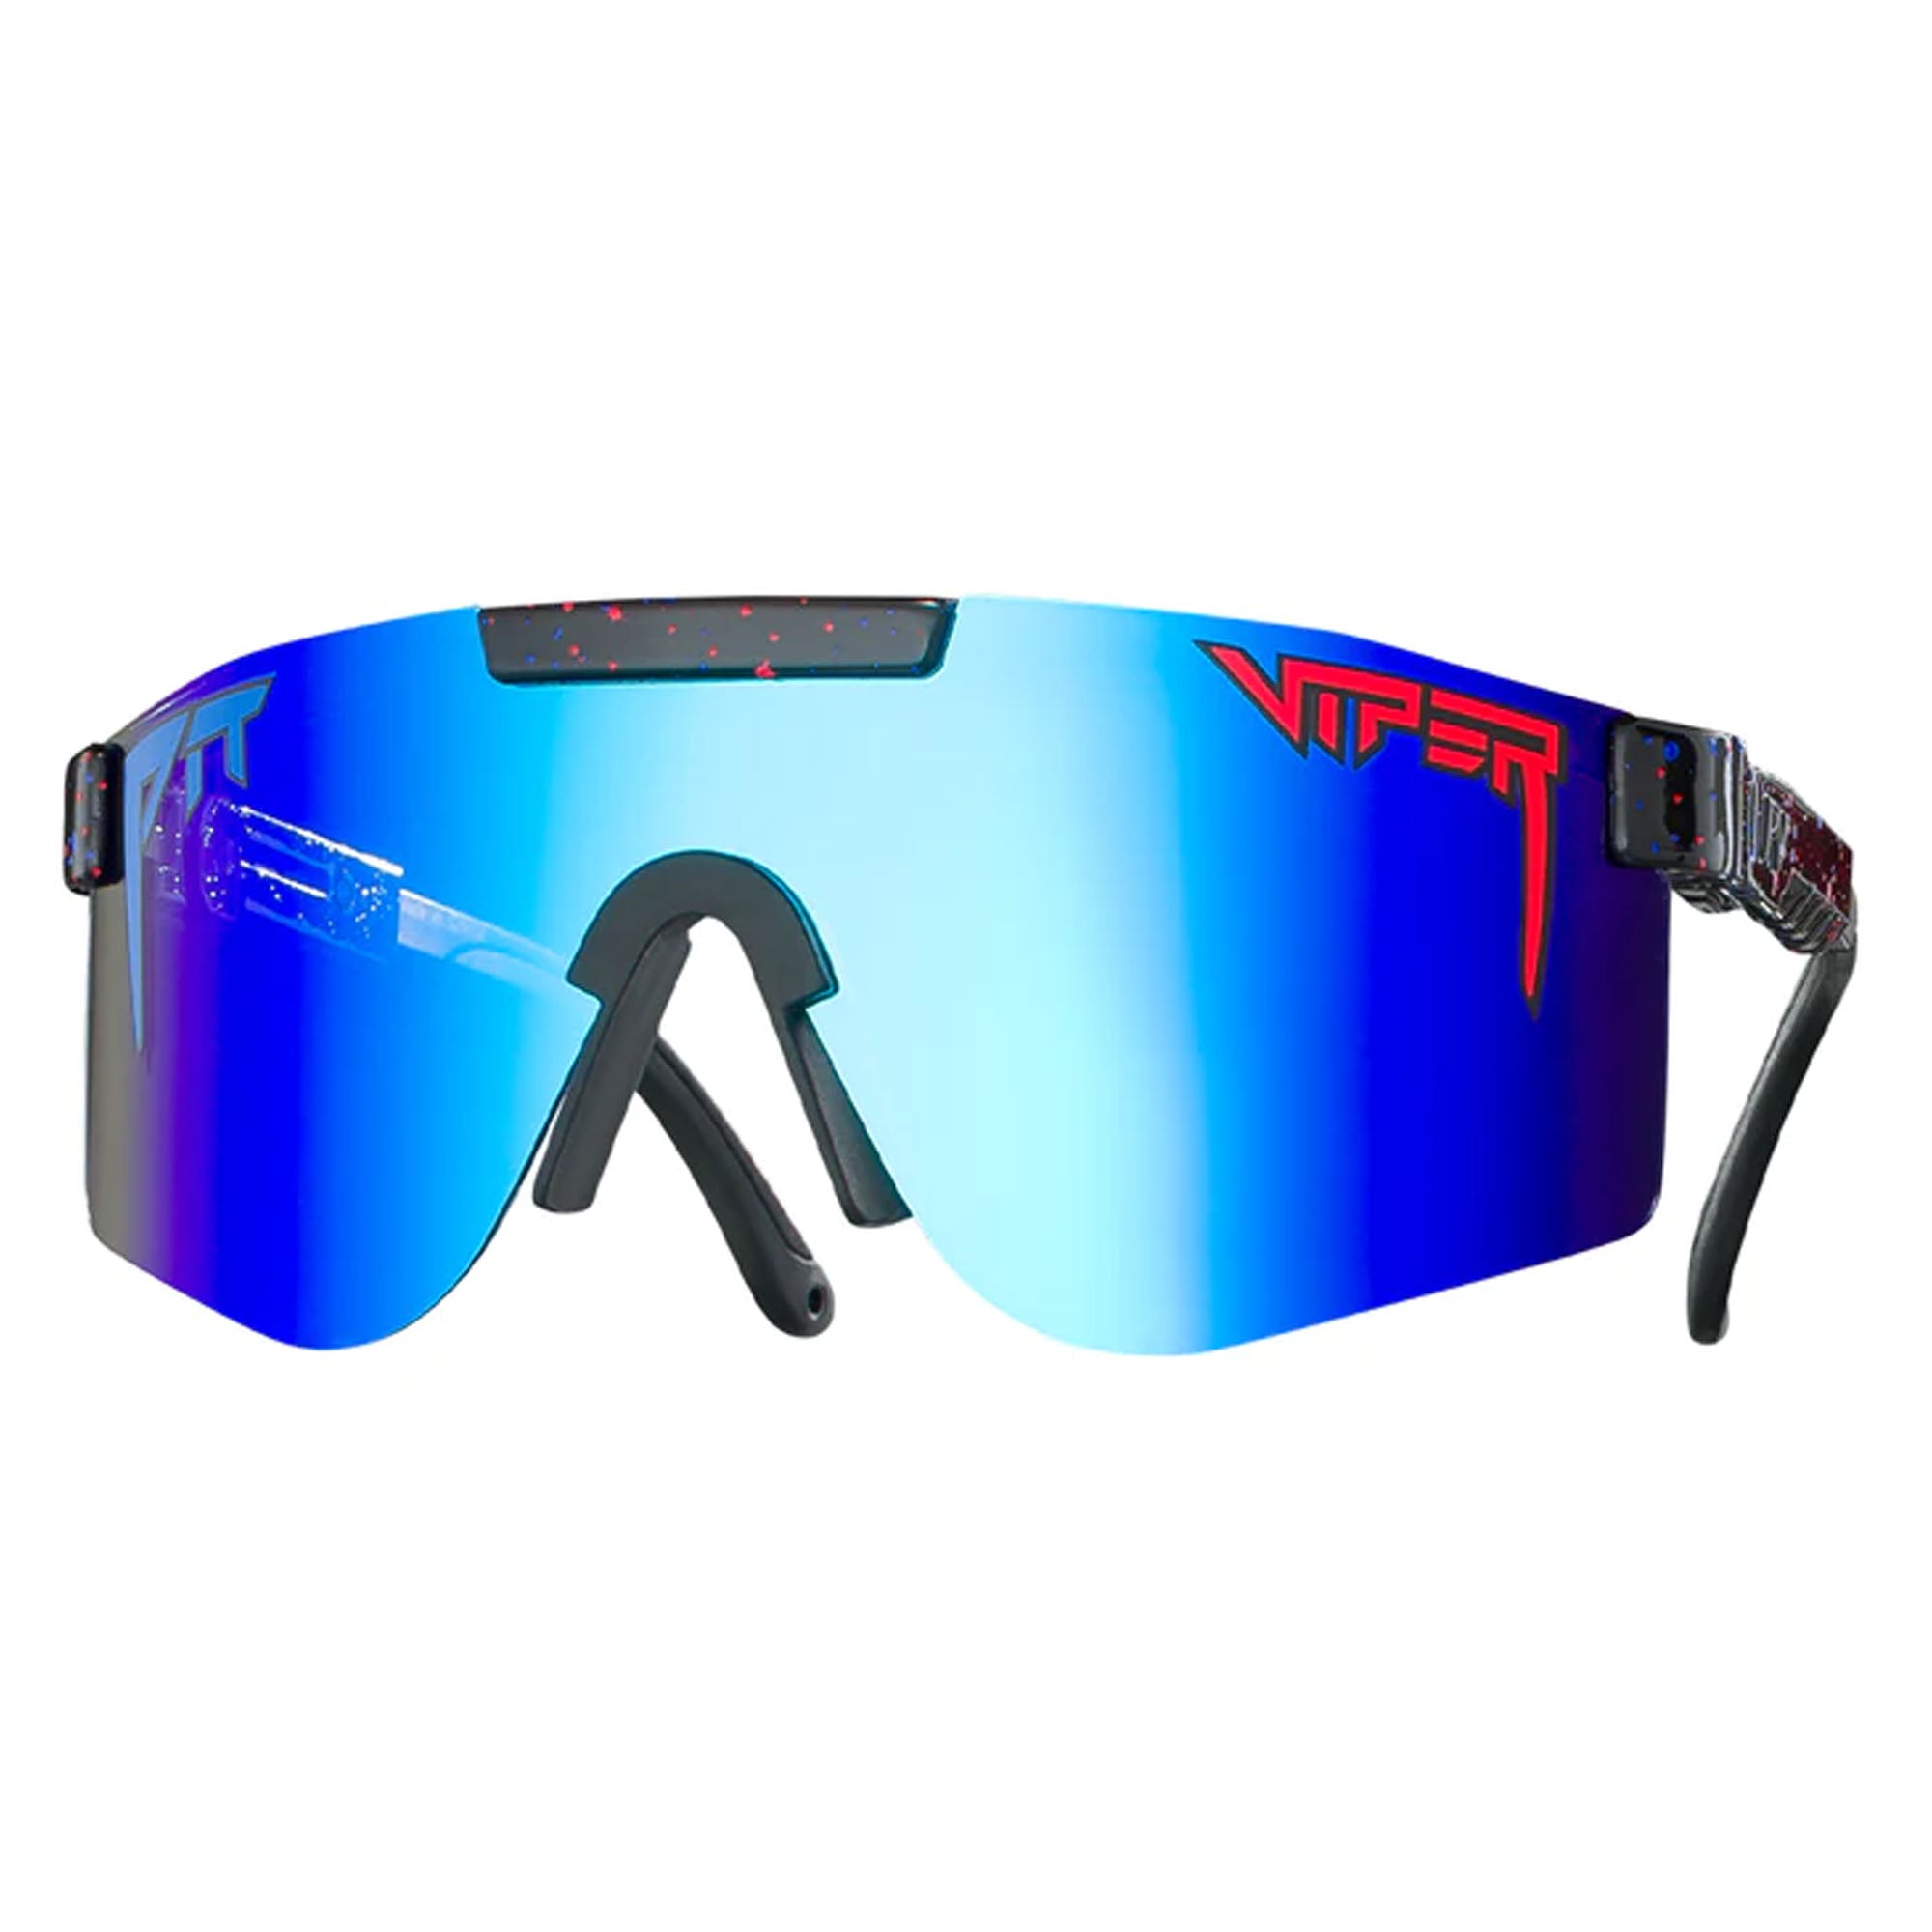 Pit Viper The Absolute Liberty Polarized Double Wide Men's Sunglasses